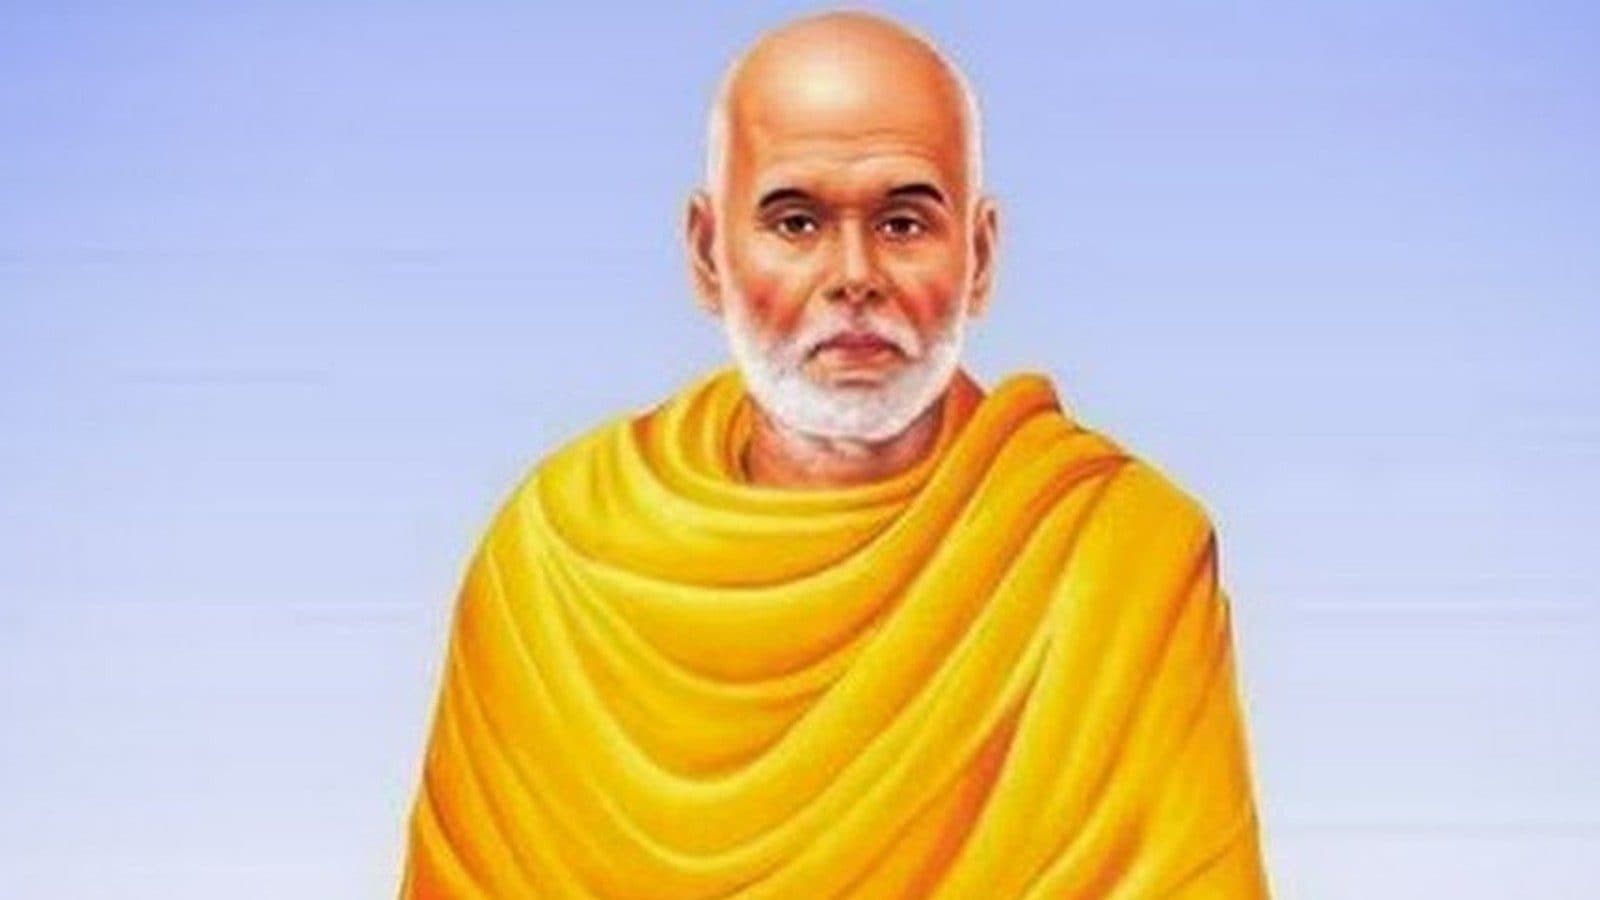 Incredible Compilation of Over 999+ Sree Narayana Guru Images in Stunning 4K Quality